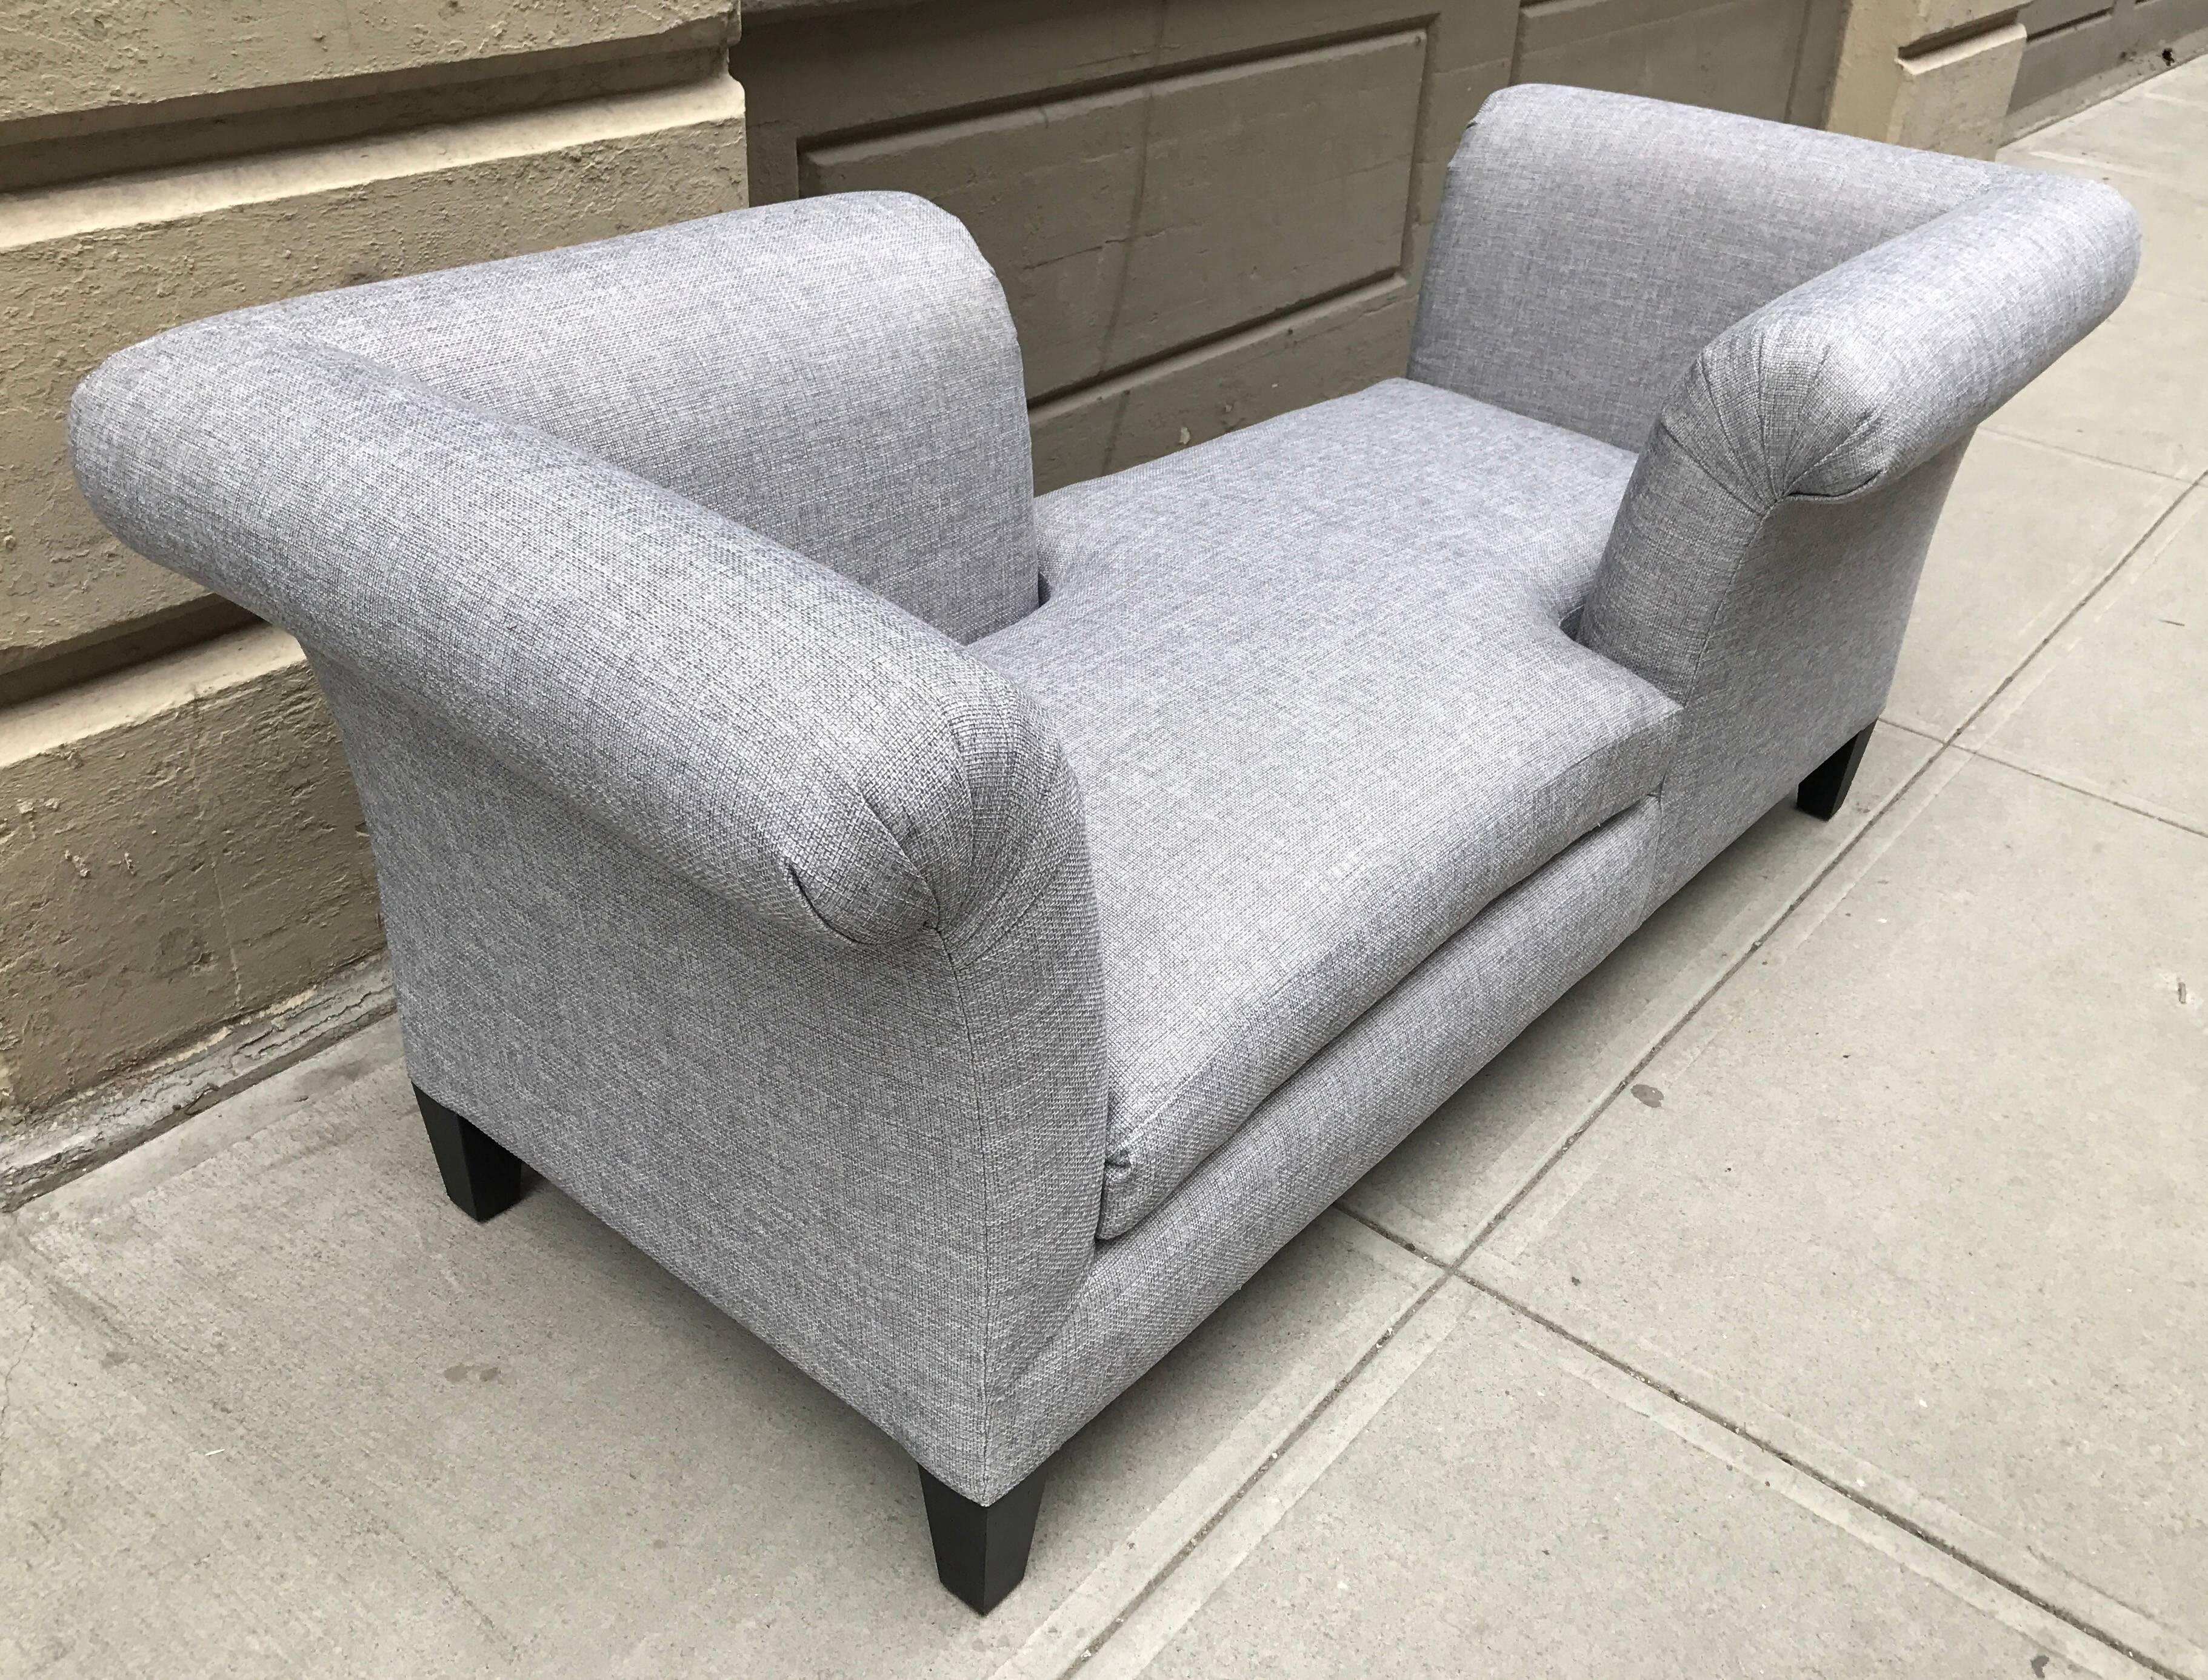 Flavor Custom Design Tete-a-Tete. Upholstered gray linen-blend material. Has a down seat and black lacquered legs.
COM available at 15 yards.
This one listed is available immediately.